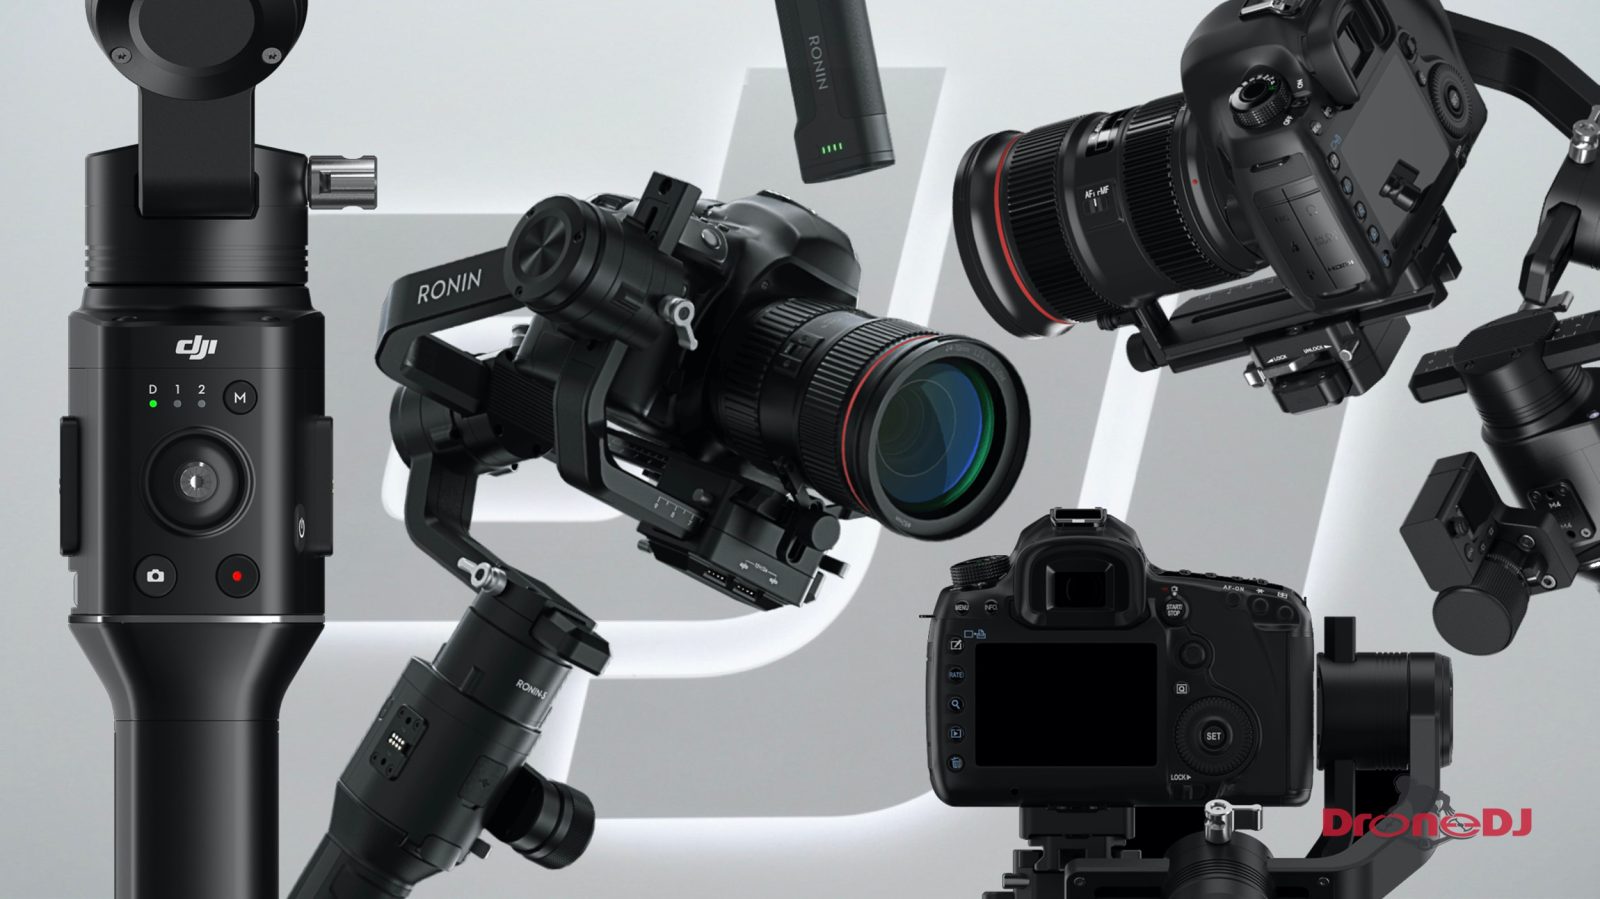 DJI Ronin S single-handed stabilizer - At $699, the price is right. Pre-order today!